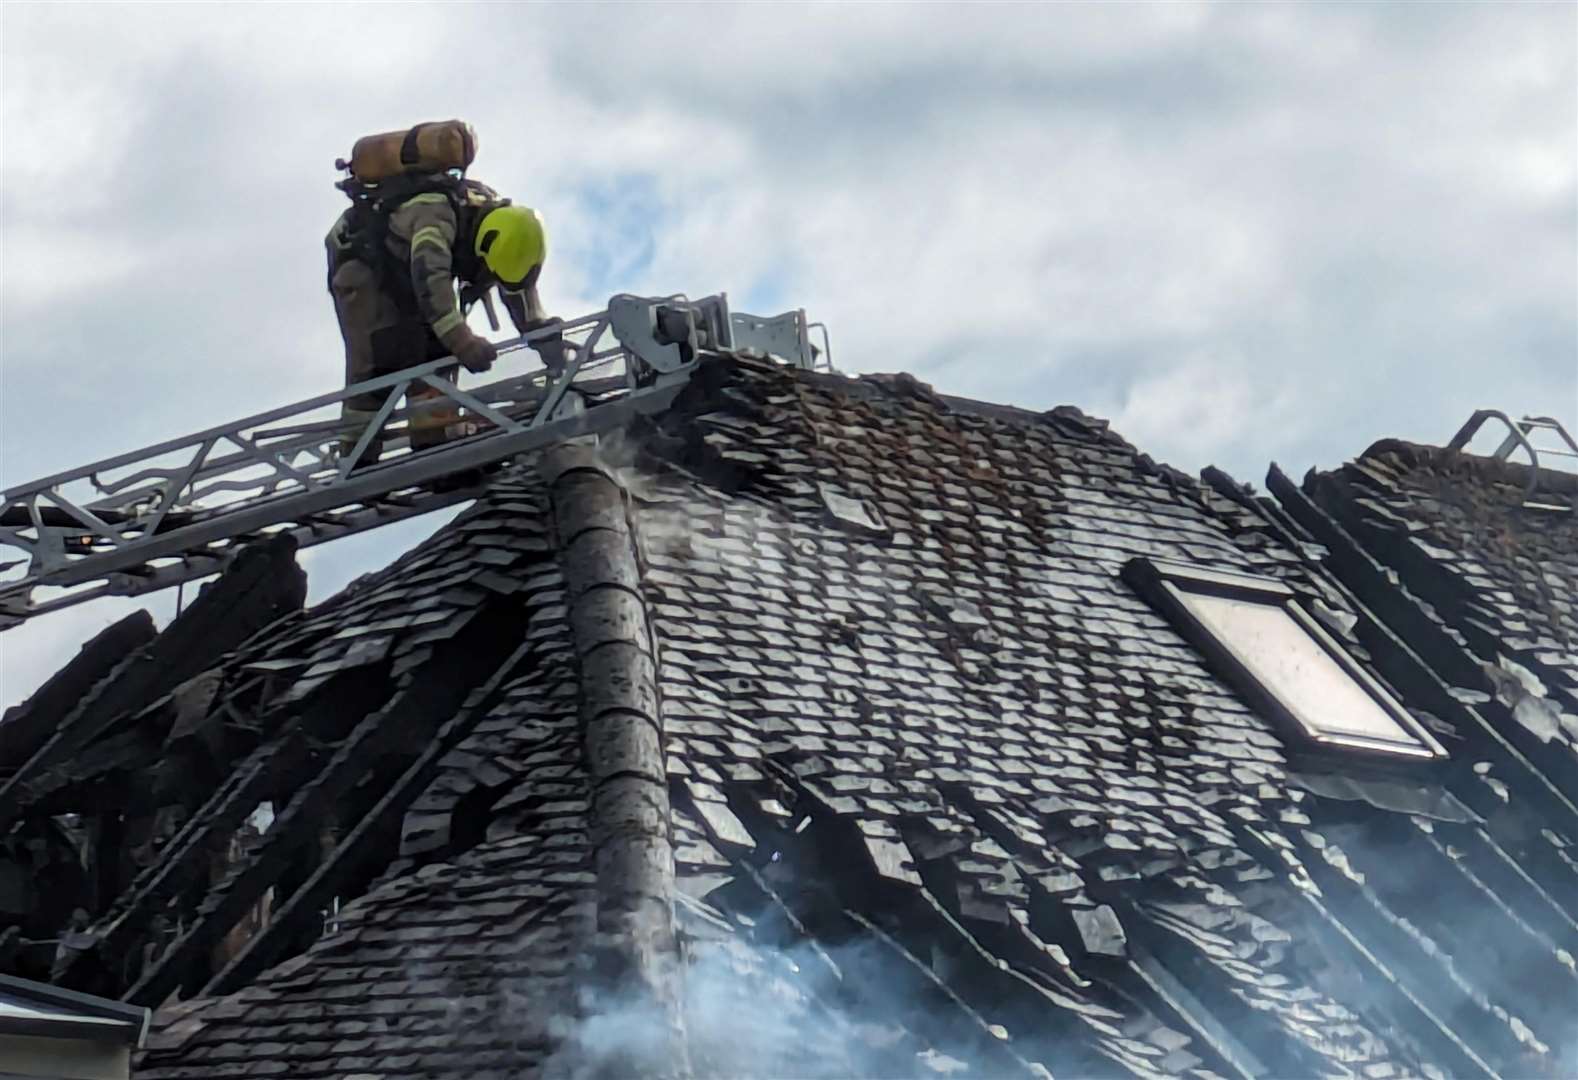 Fire crews used an extended ladder to reach the blaze